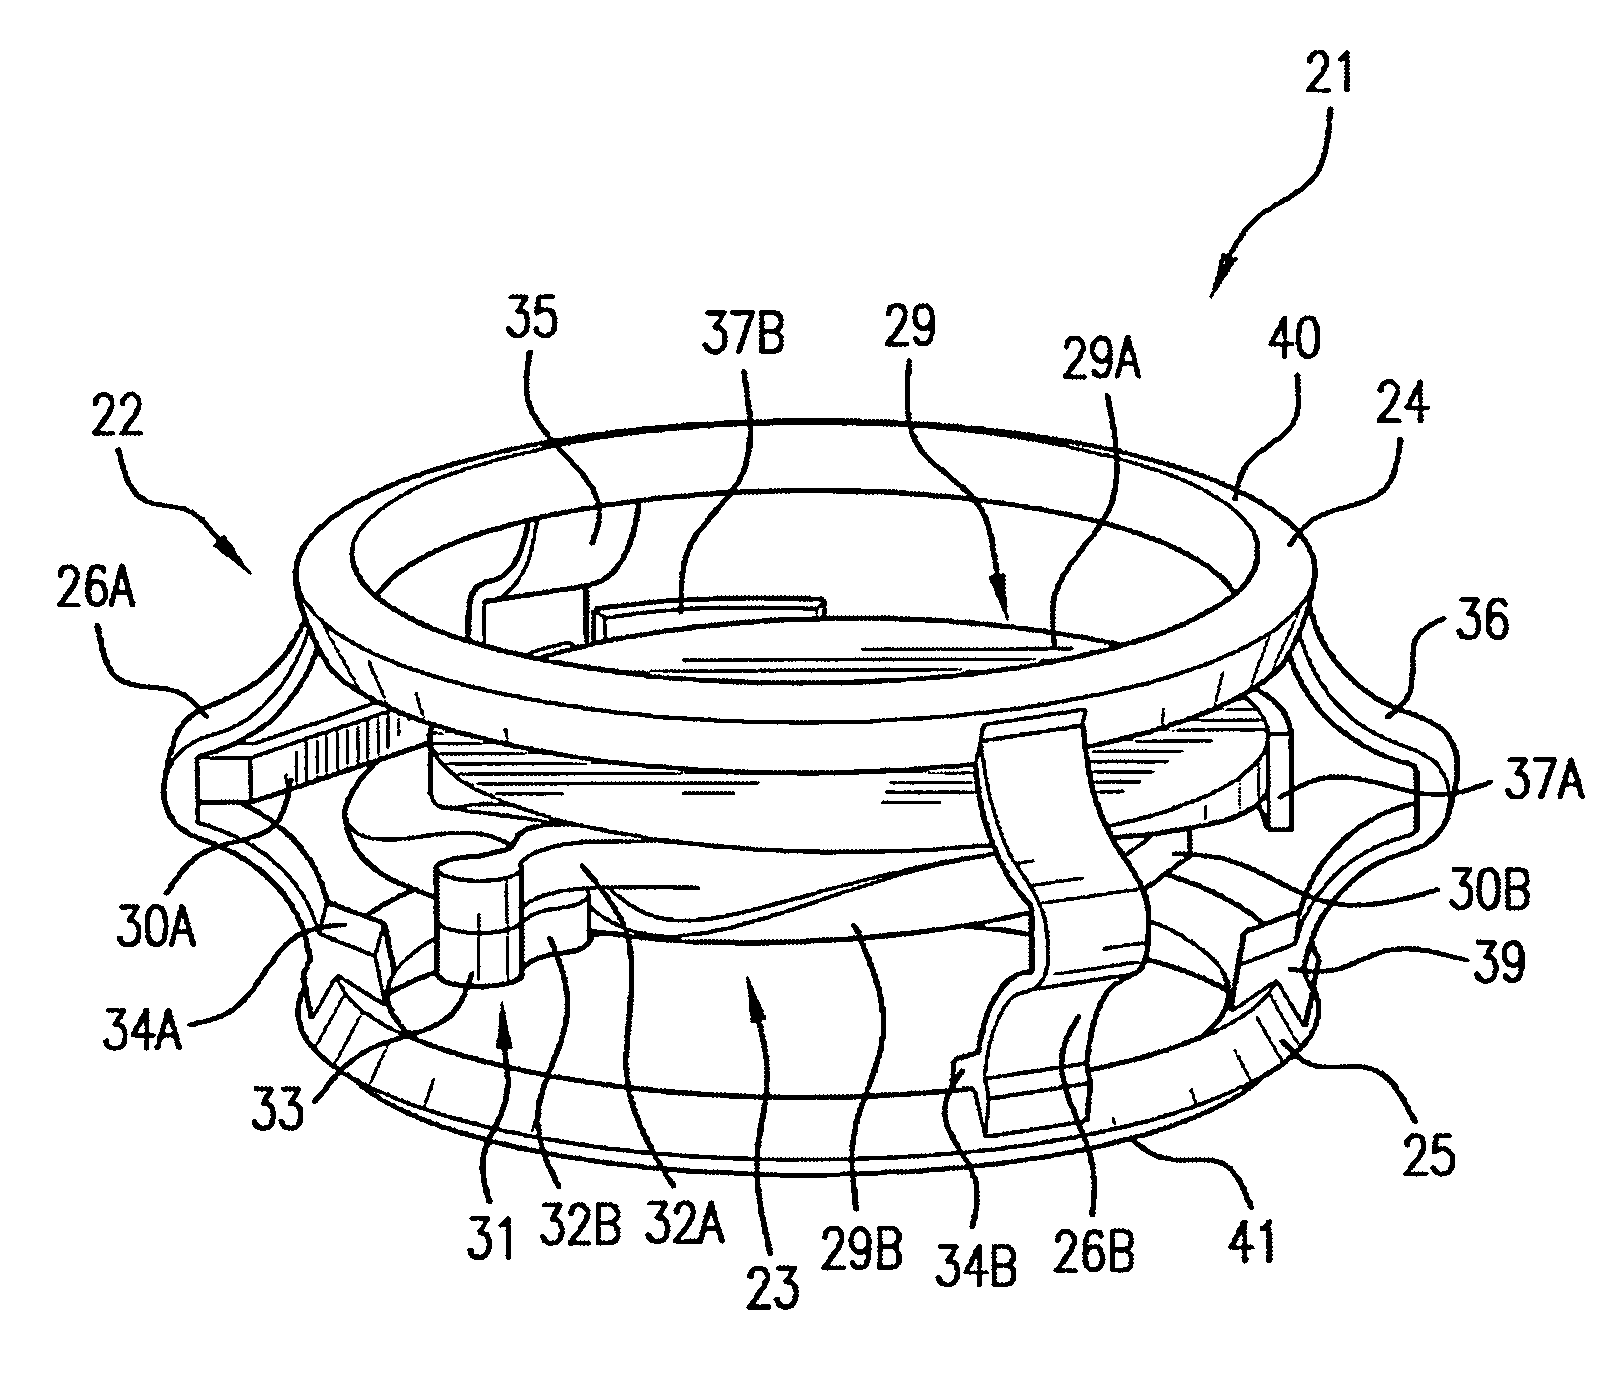 Accommodating intraocular lenses and associated systems, frames, and methods